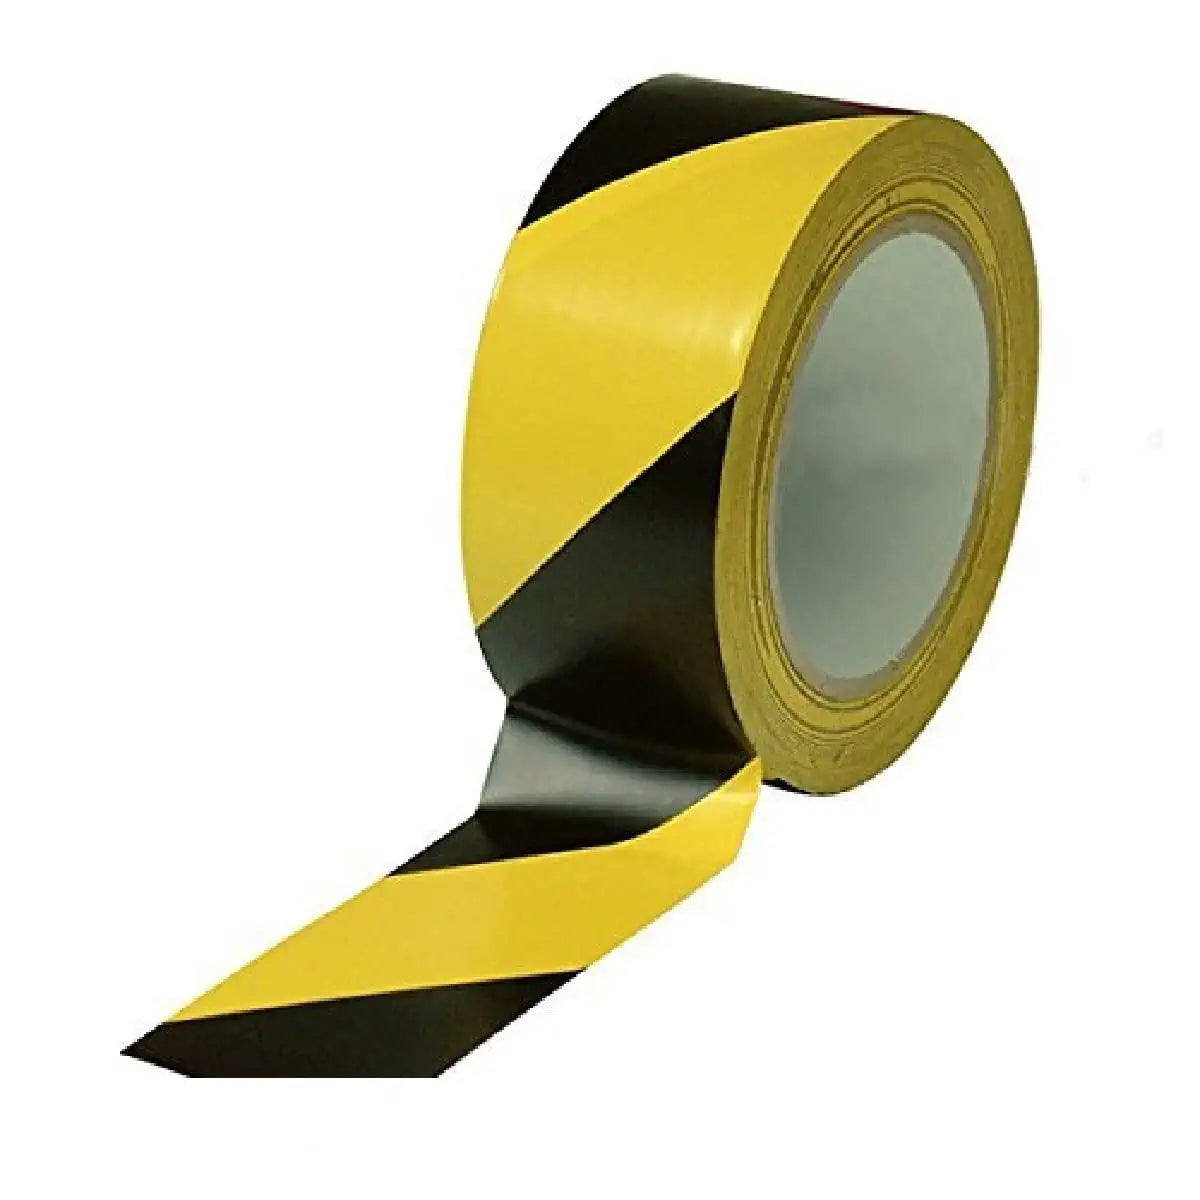  WOD DTC12 Stripe Safety Contractor Grade Black & Yellow Duct  Tape 12 Mil, 1 inch x 60 yds. Waterproof, UV Resistant for Crafts & Home  Improvement : Industrial & Scientific